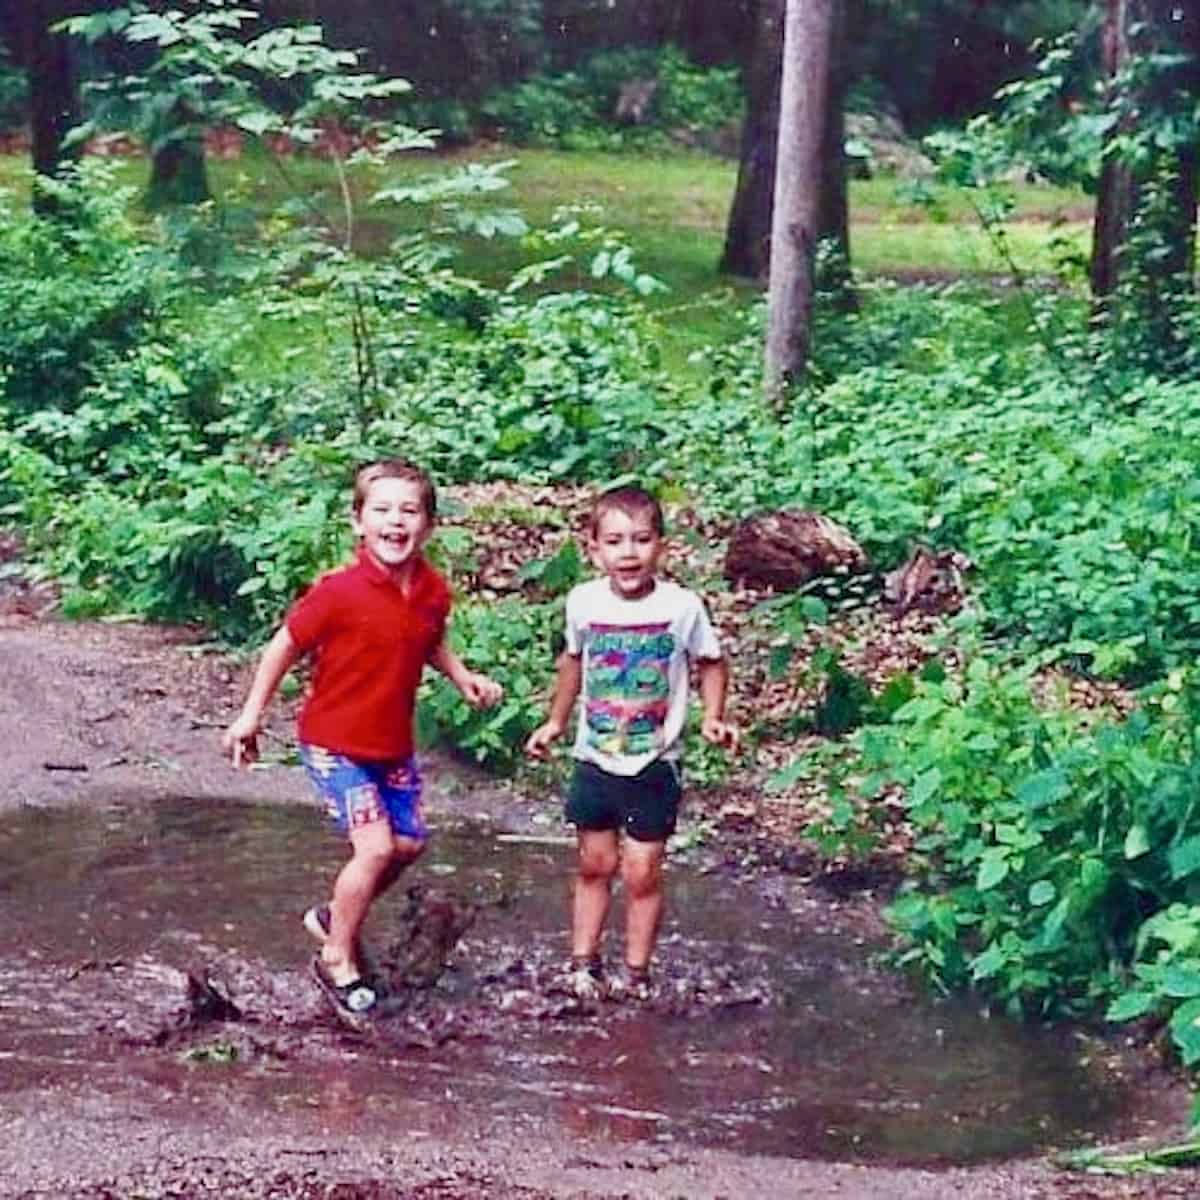 Will and friend playing in a mud puddle.